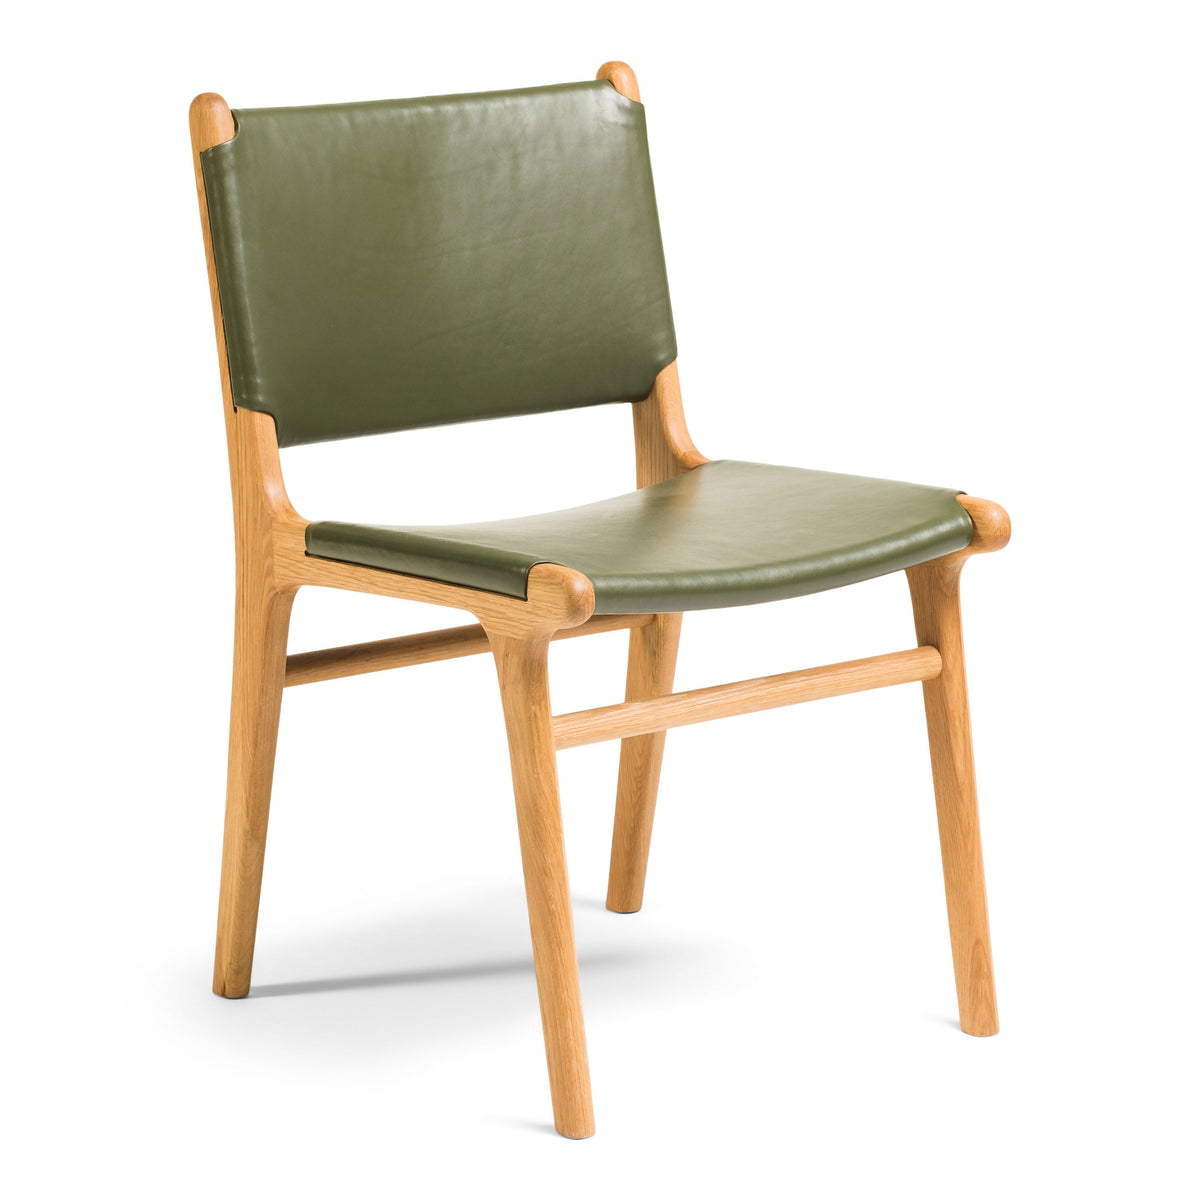 Clearance - Spensley Dining Chair - Olive